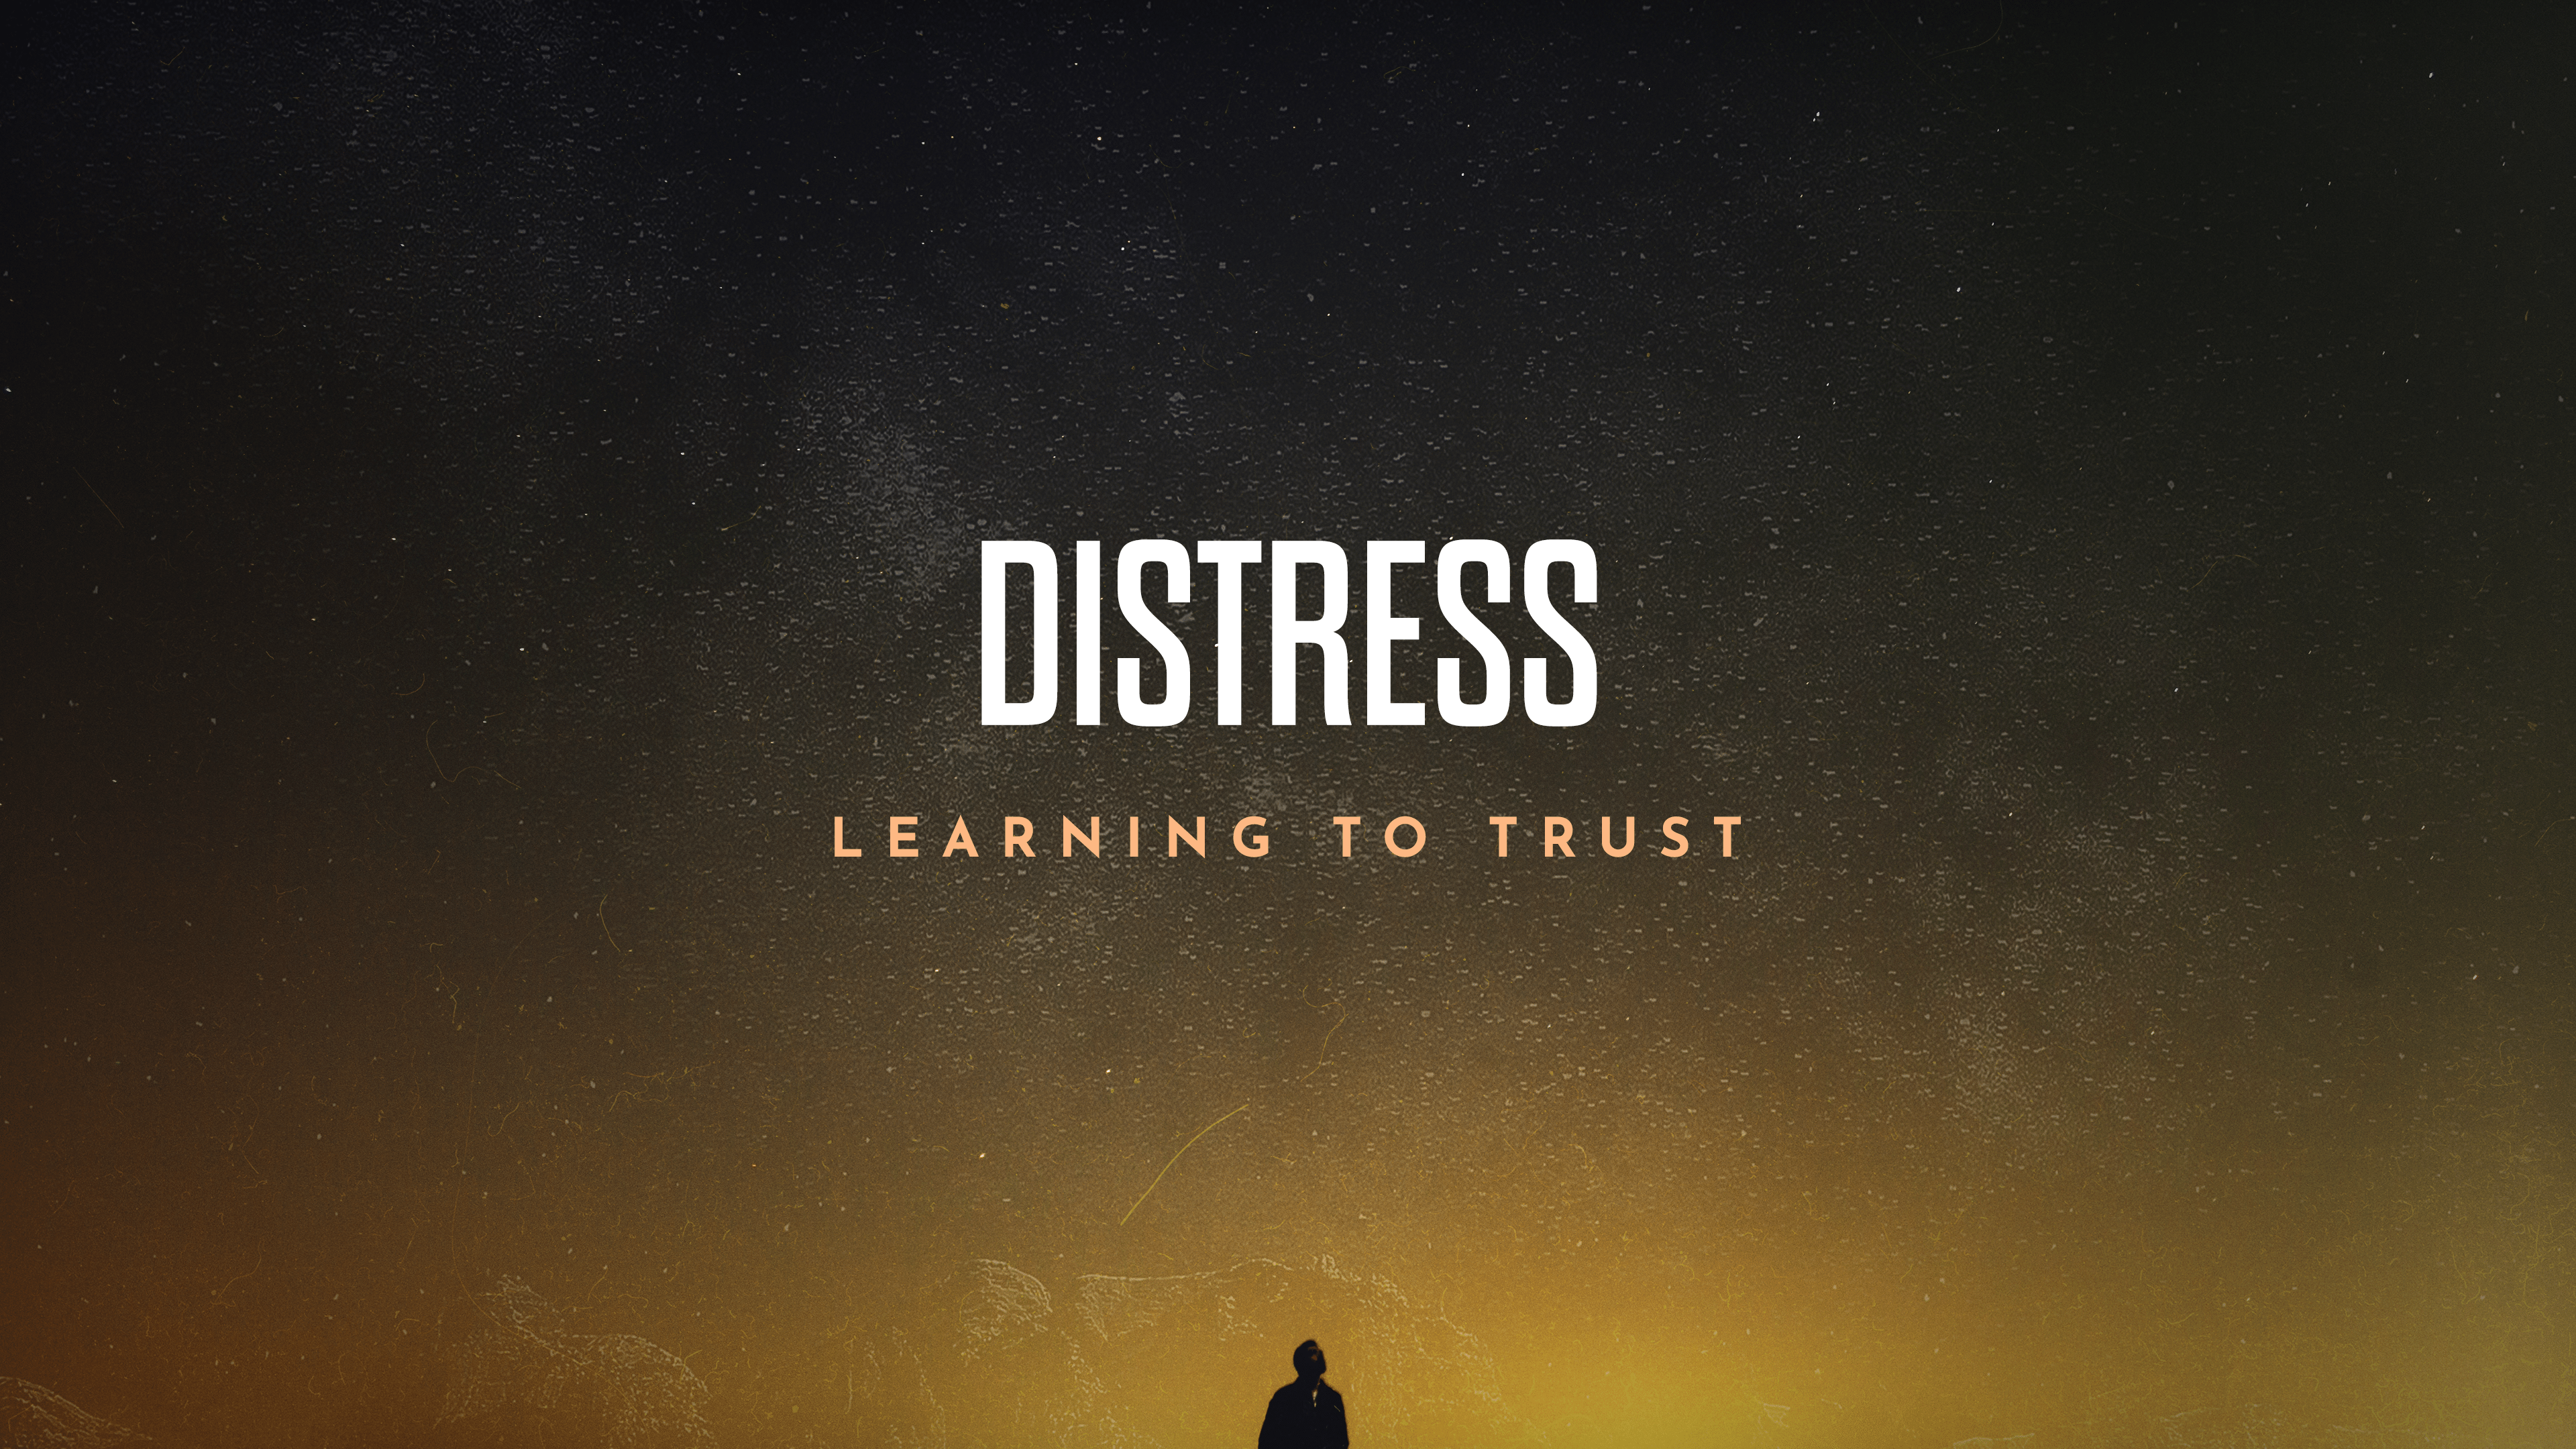 Featured image for “Distress”